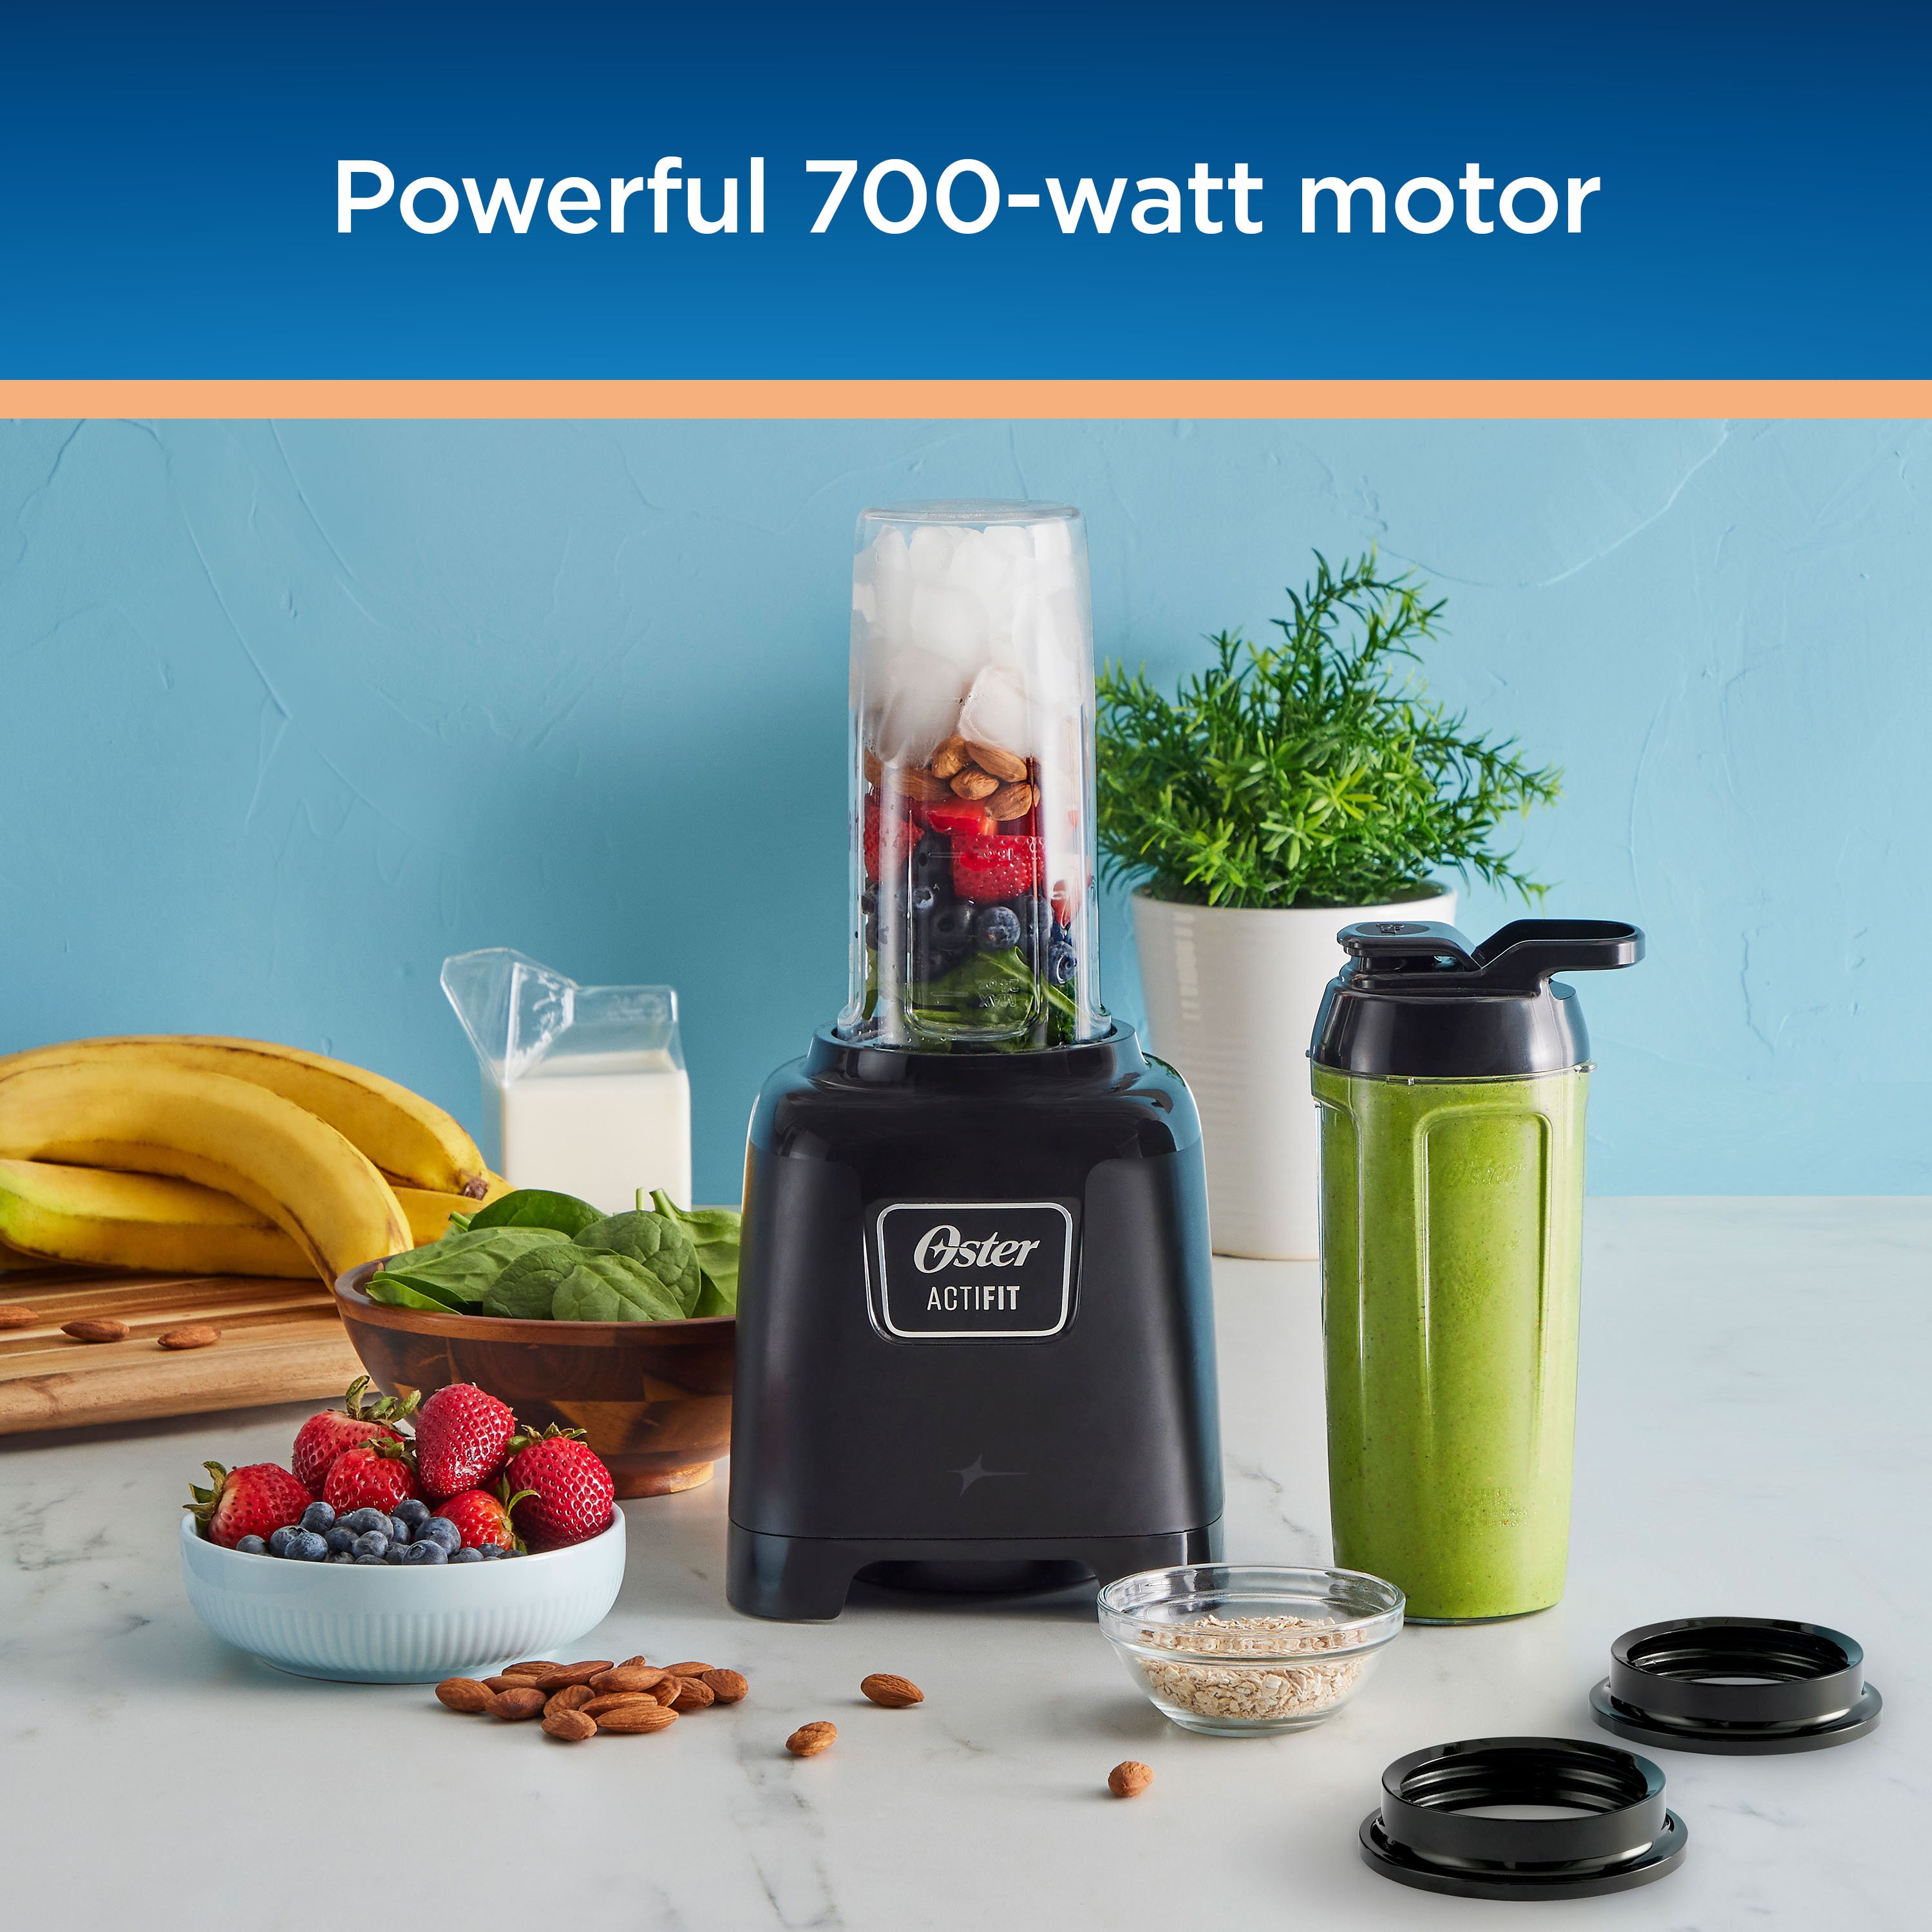 Meet your new BFF! The NEW Oster Actifit Personal Blender has a powerful  700 watt motor that effortlessly blends frozen fruits and veggies…